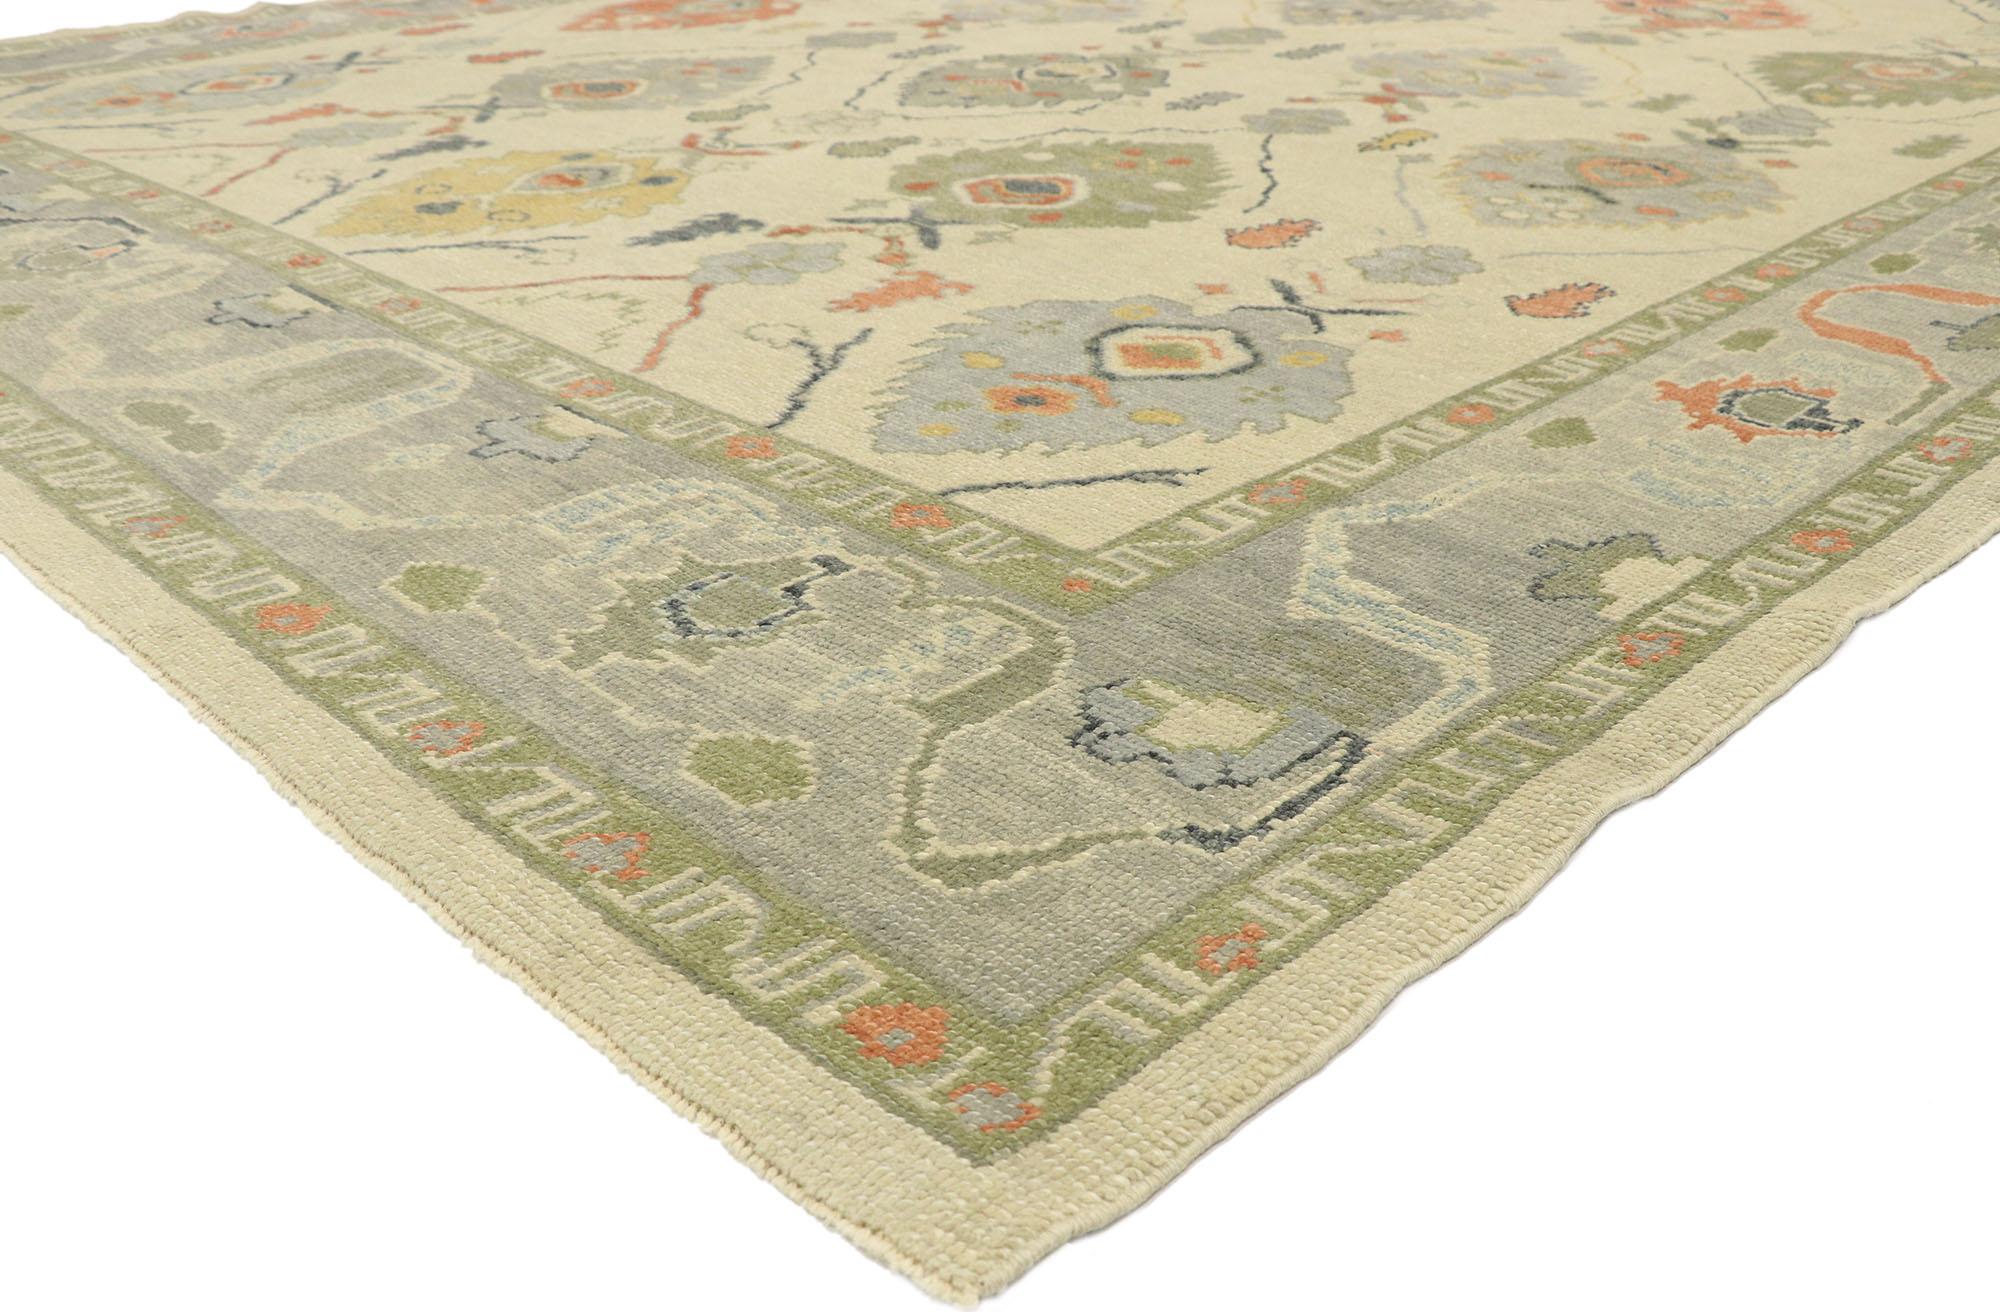 52884, new contemporary Turkish Oushak rug with modern transitional style 10'02 x 15'01. Blending elements from the modern world with light and airy colors, this hand knotted wool contemporary Turkish Oushak rug will boost the coziness factor in